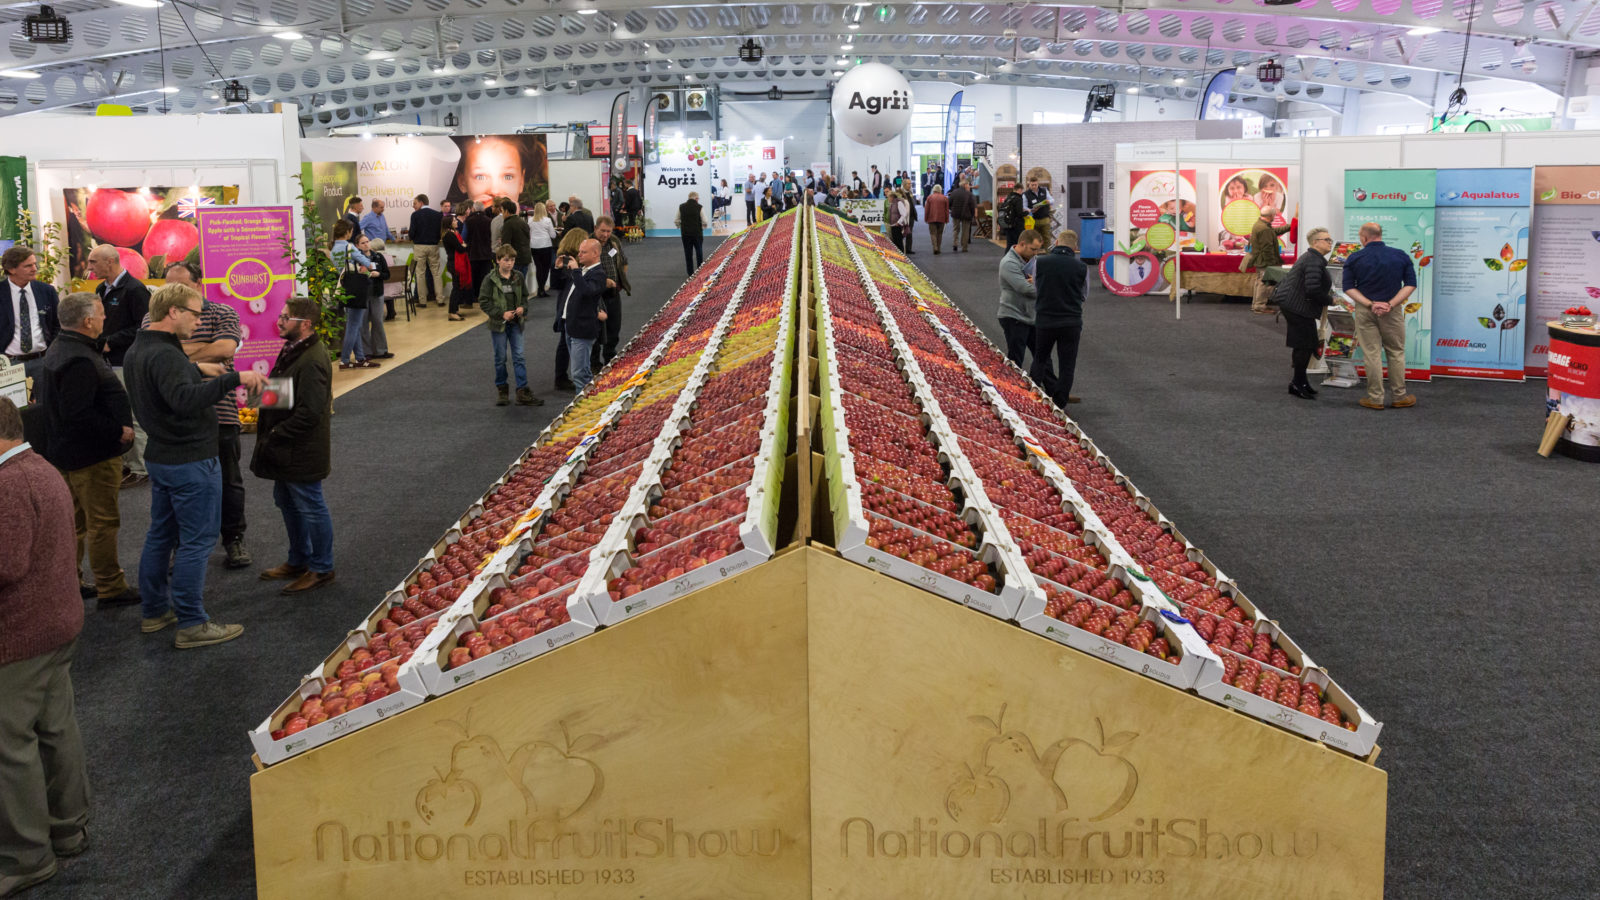 UK’s National Fruit Show to celebrate heroic growers